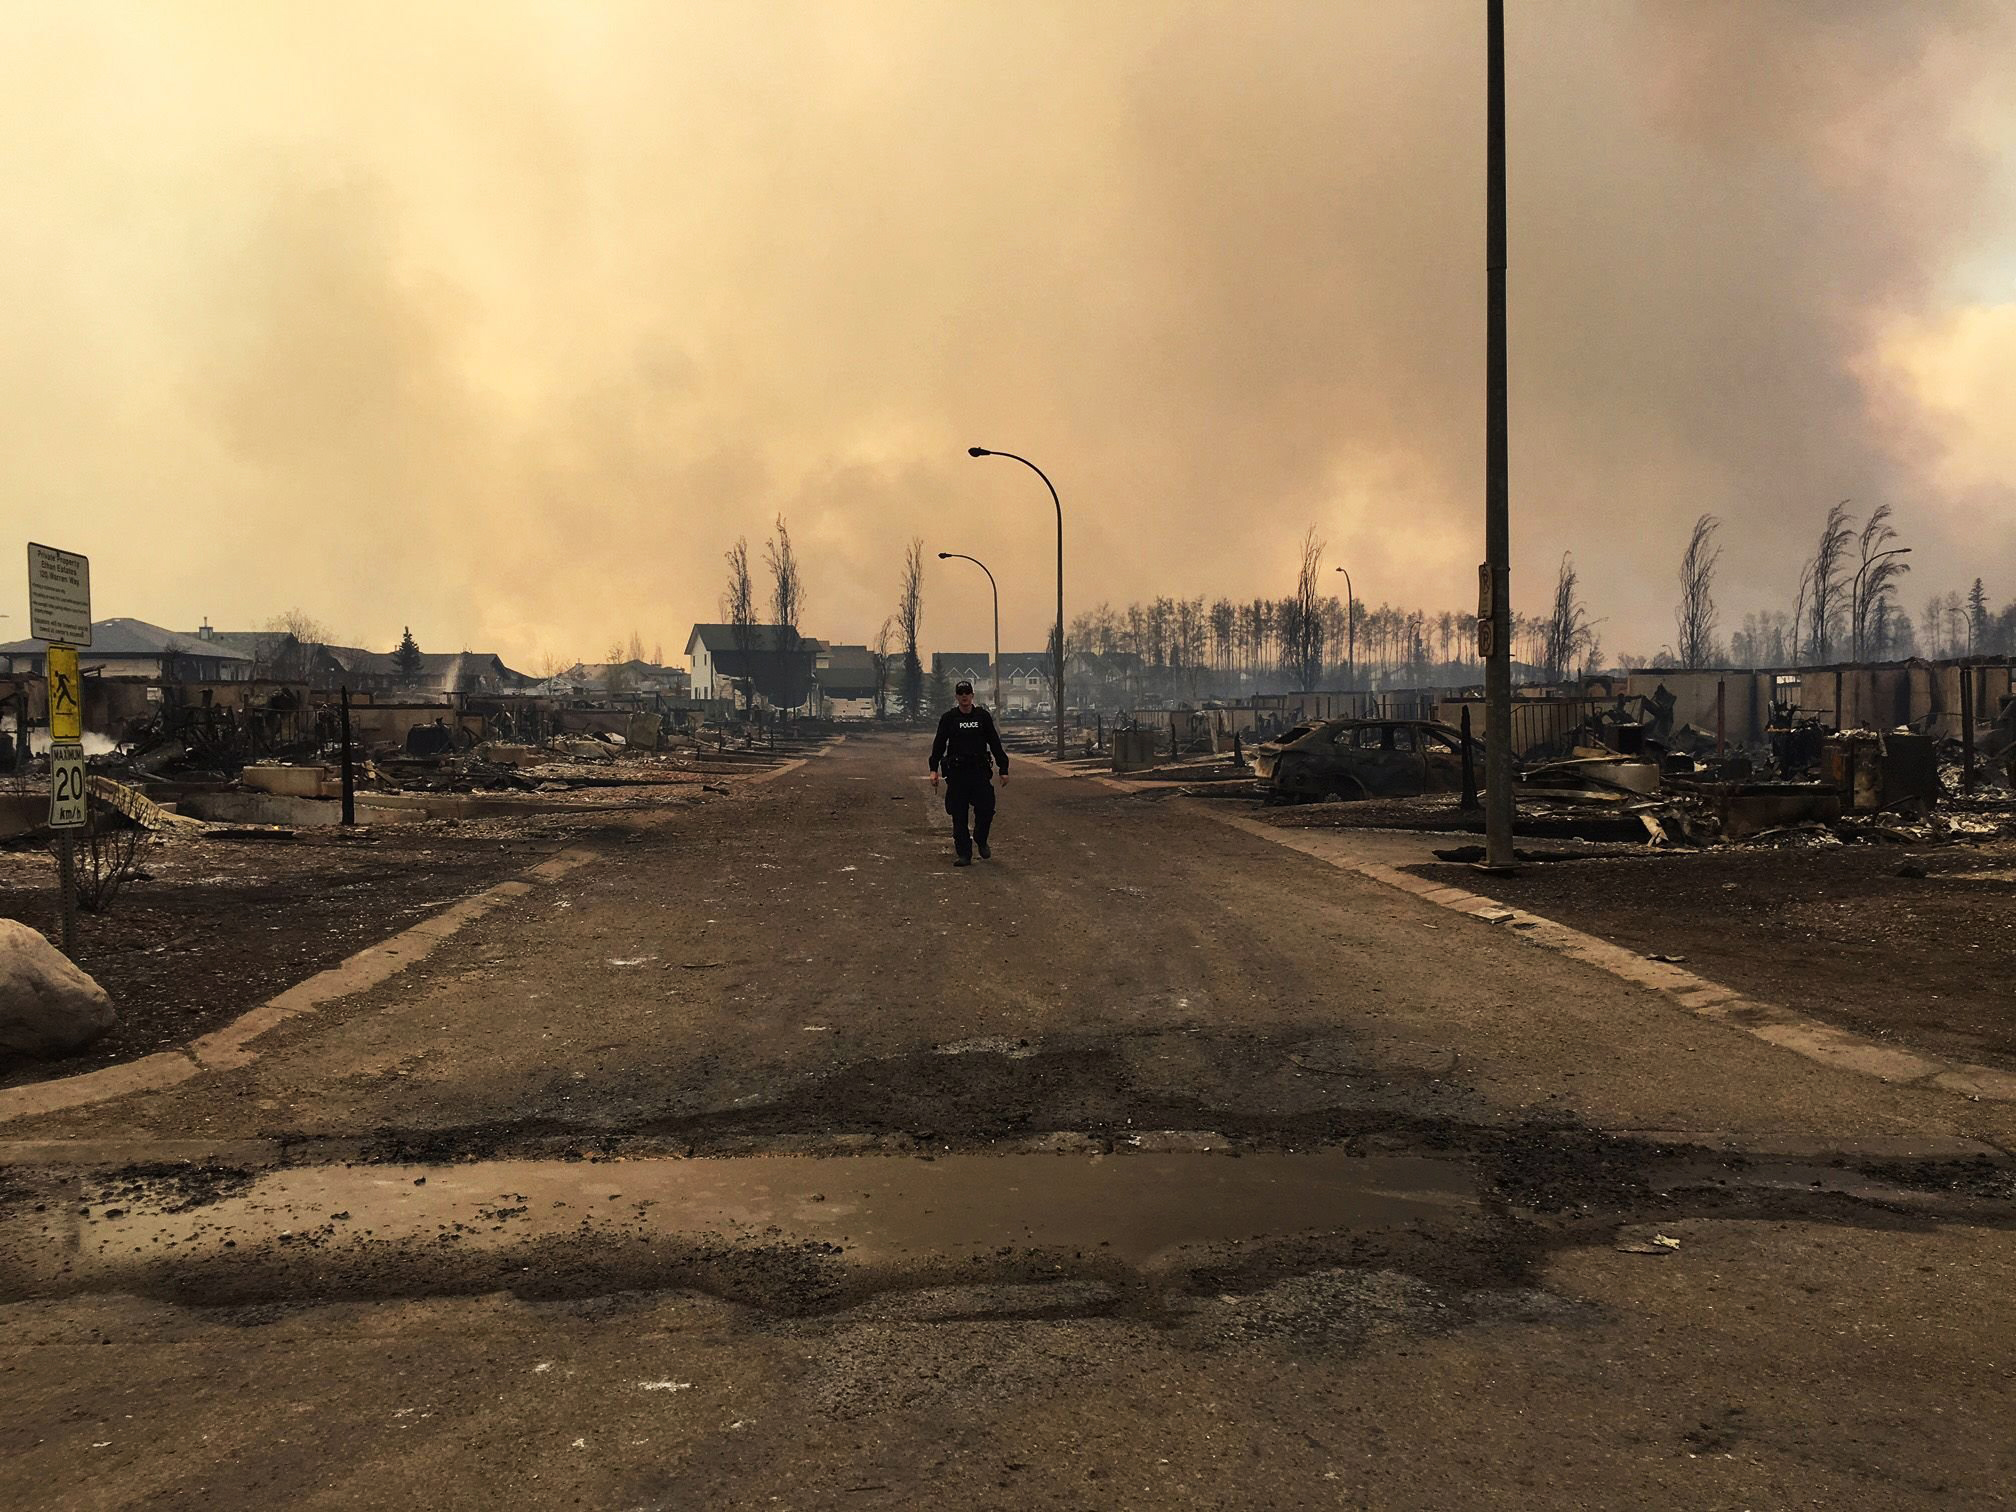 This photo released by the Alberta RCMP on May 5, 2016, shows a police officer walking on a road past burned down houses in Fort McMurray, Alberta. (Albert RCMP/AFP/Getty Images)